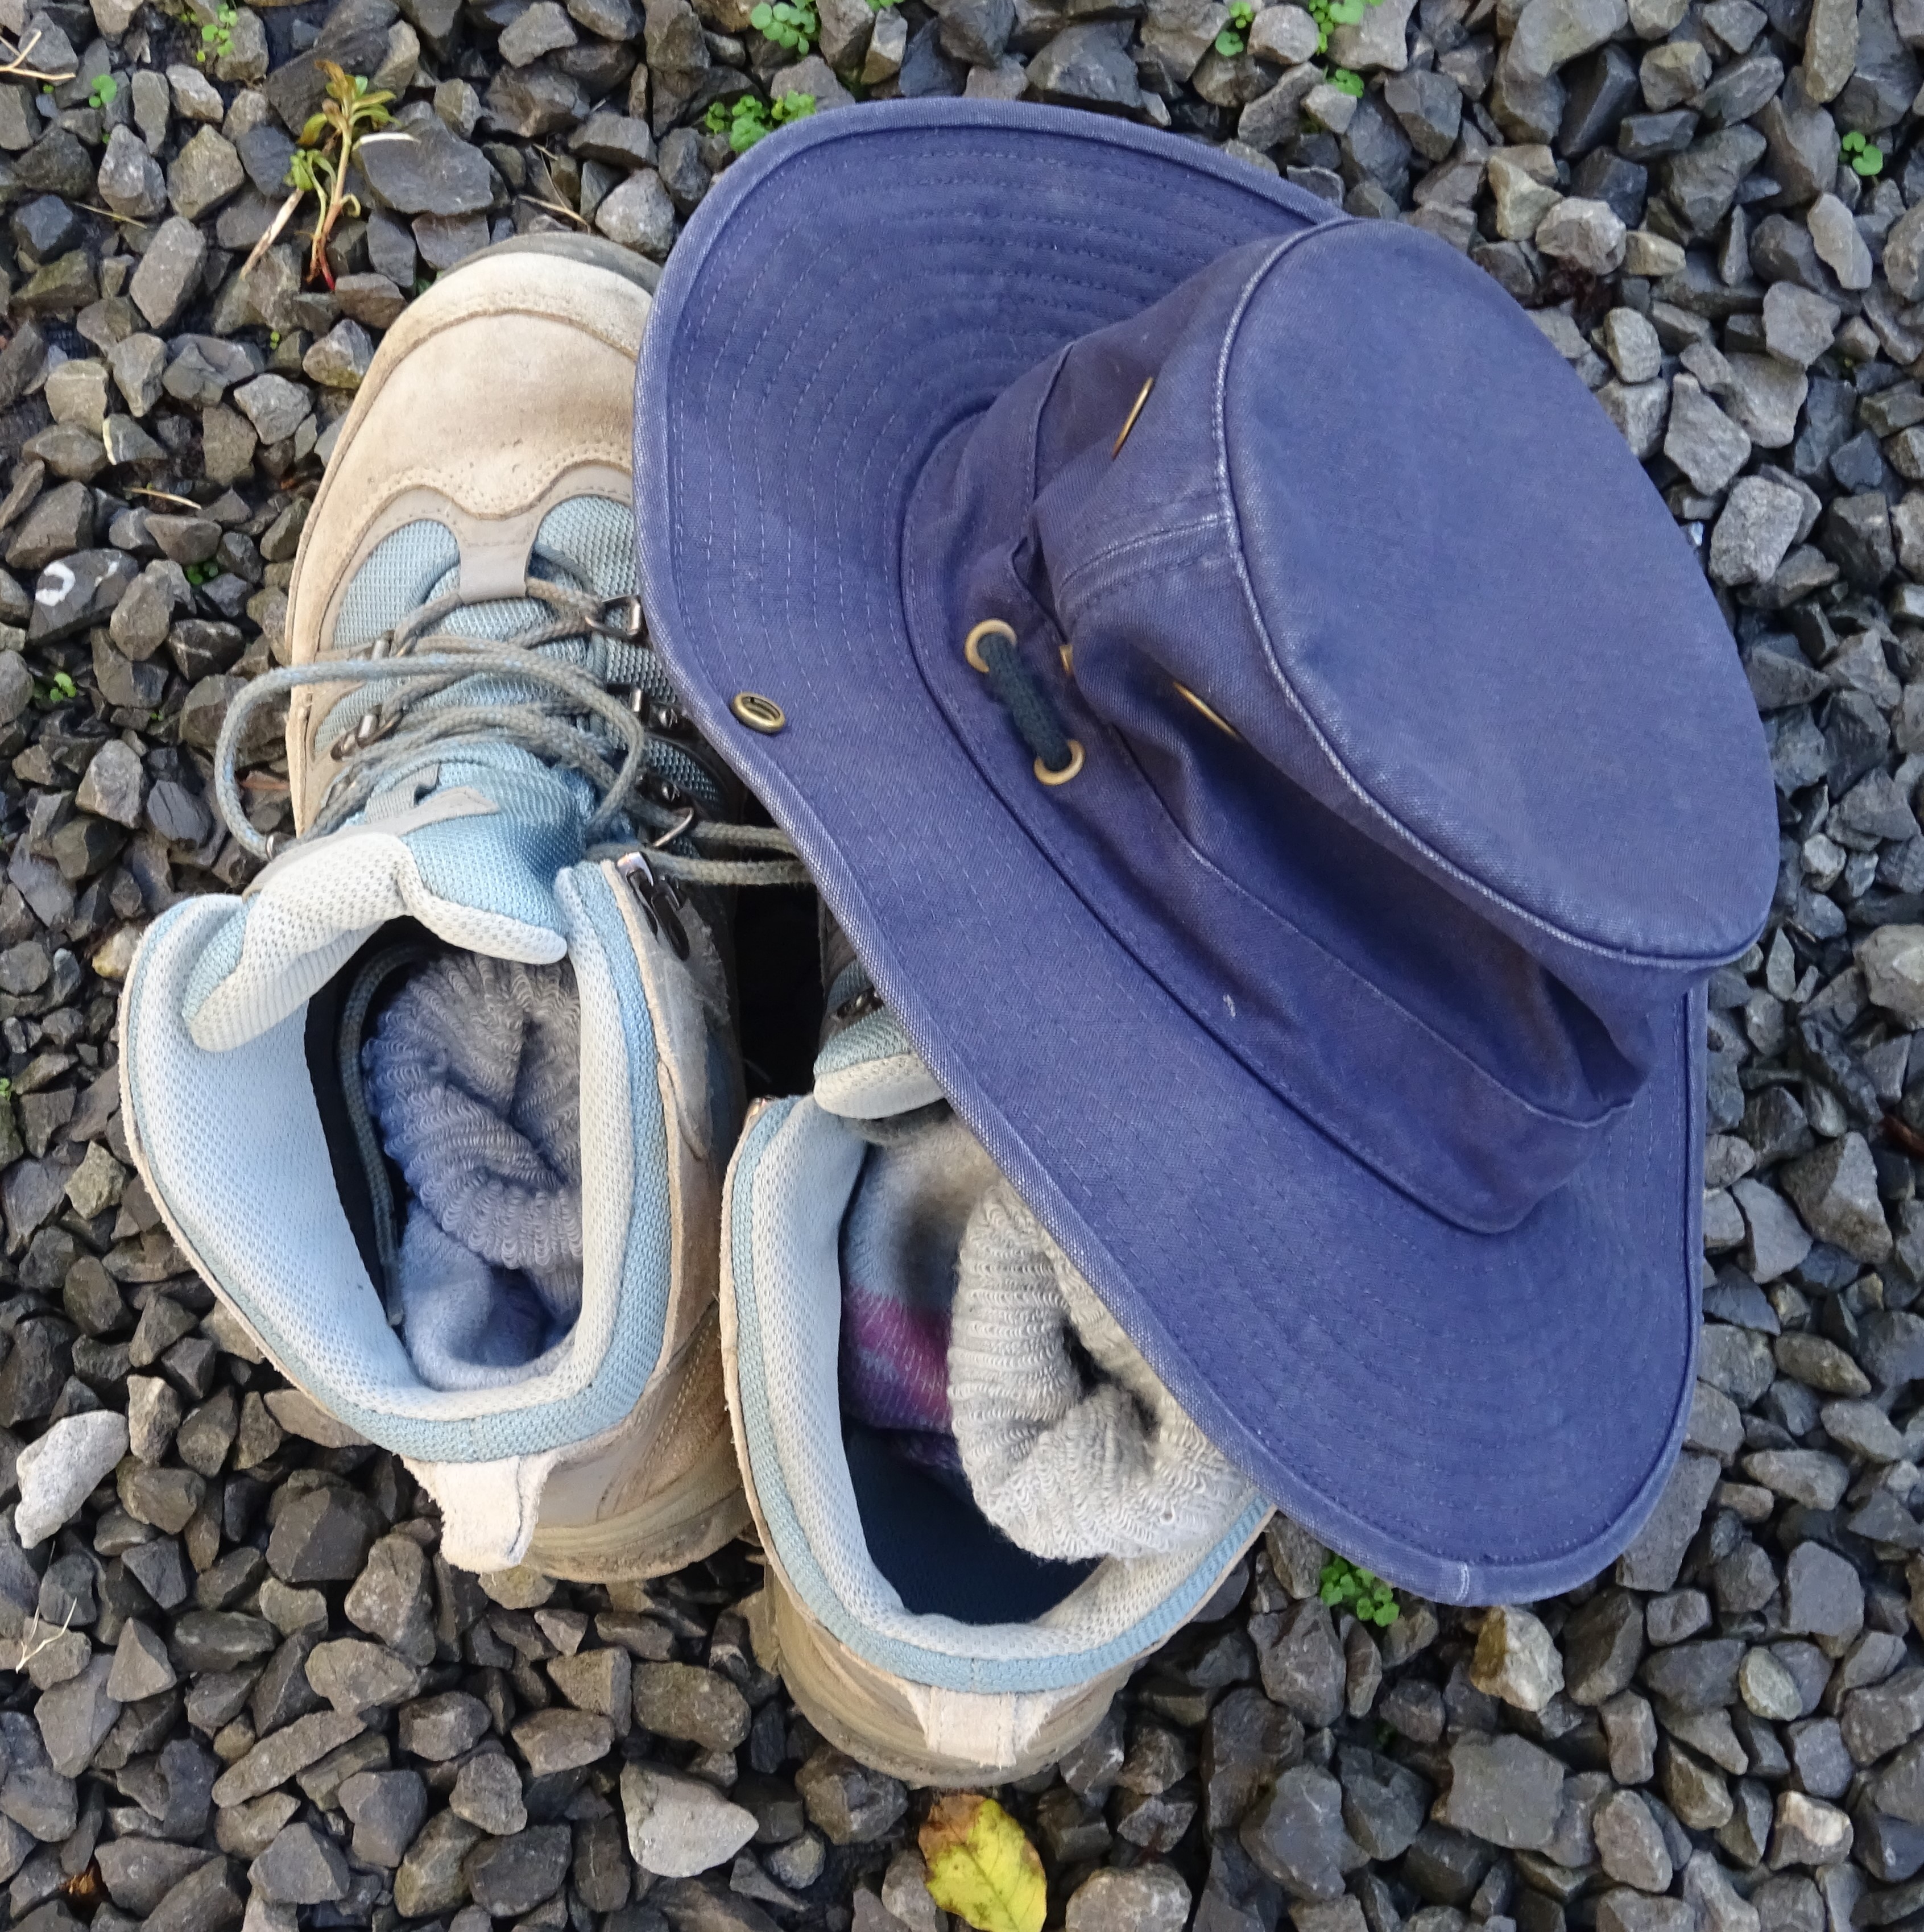 A pair of worn walking boots and an old, blue, wide brimmed hat. 